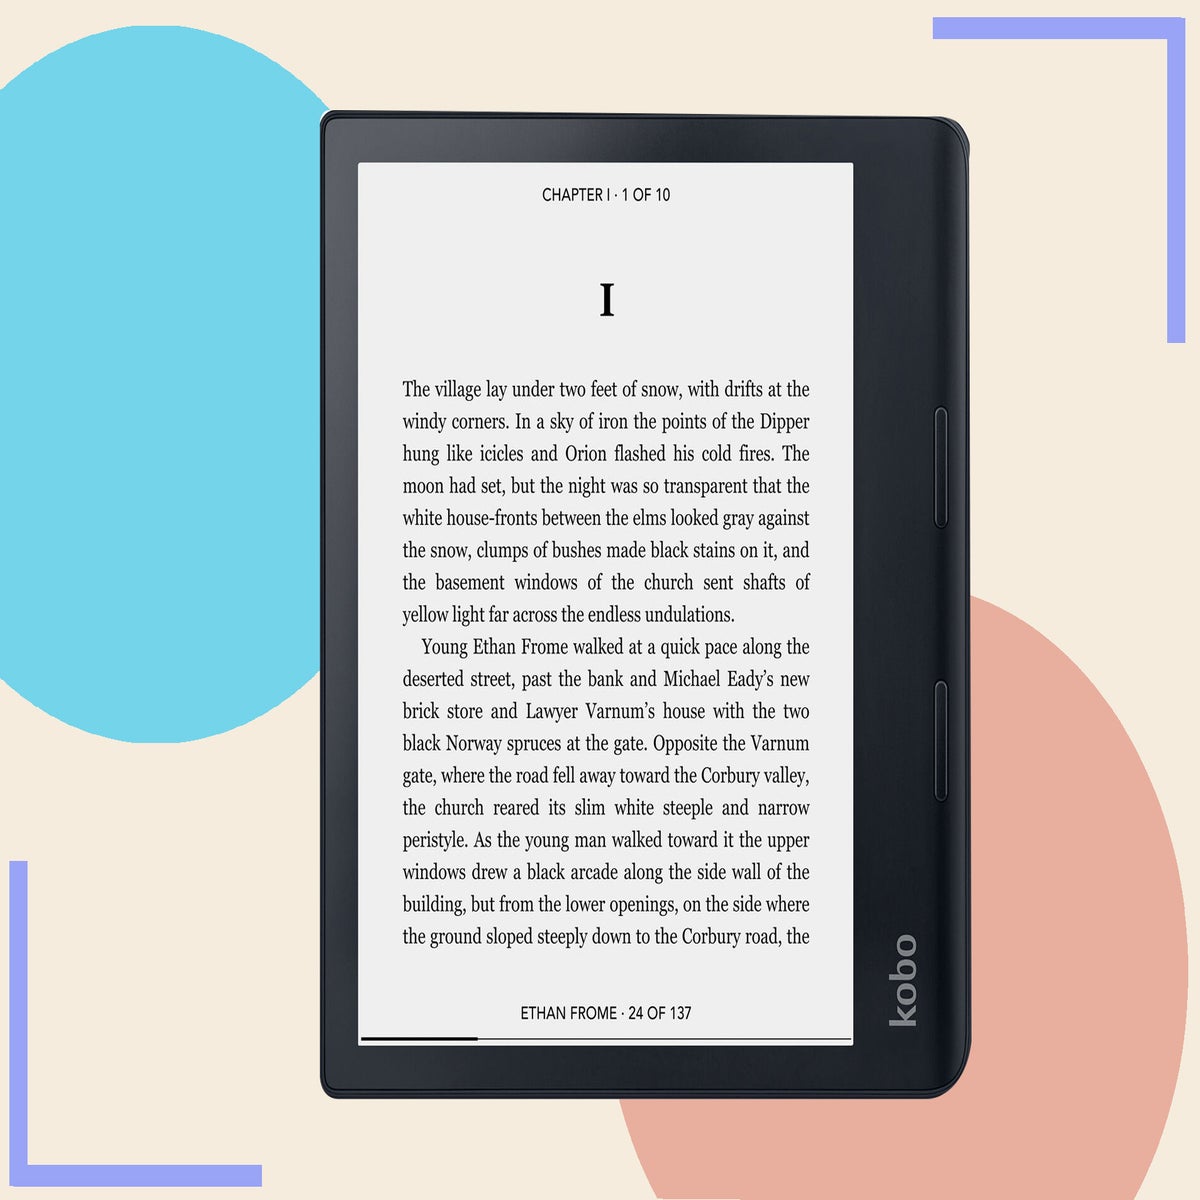 Kobo sage review: Screen, design, stylus and audio quality of the